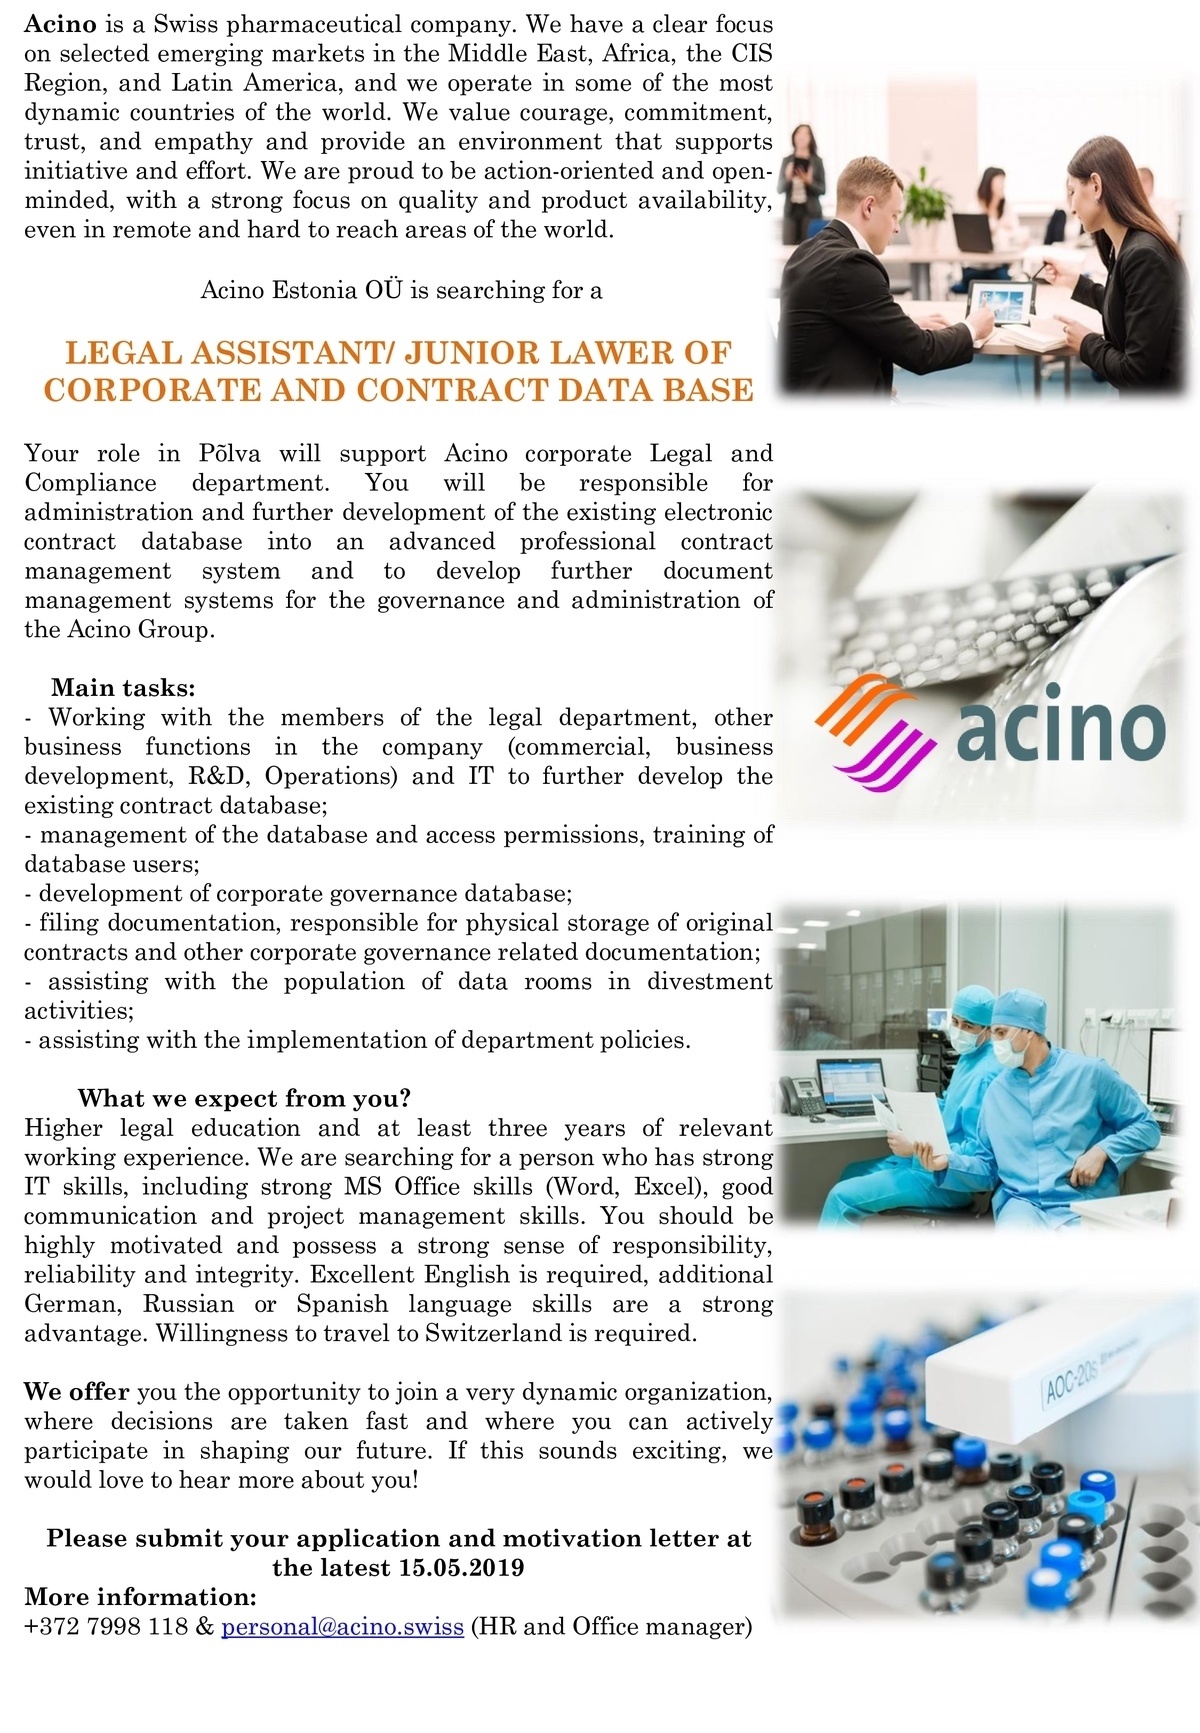 Acino Estonia OÜ LEGAL ASSISTANT/ JUNIOR LAWER OF CORPORATE AND CONTRACT DATA BASE